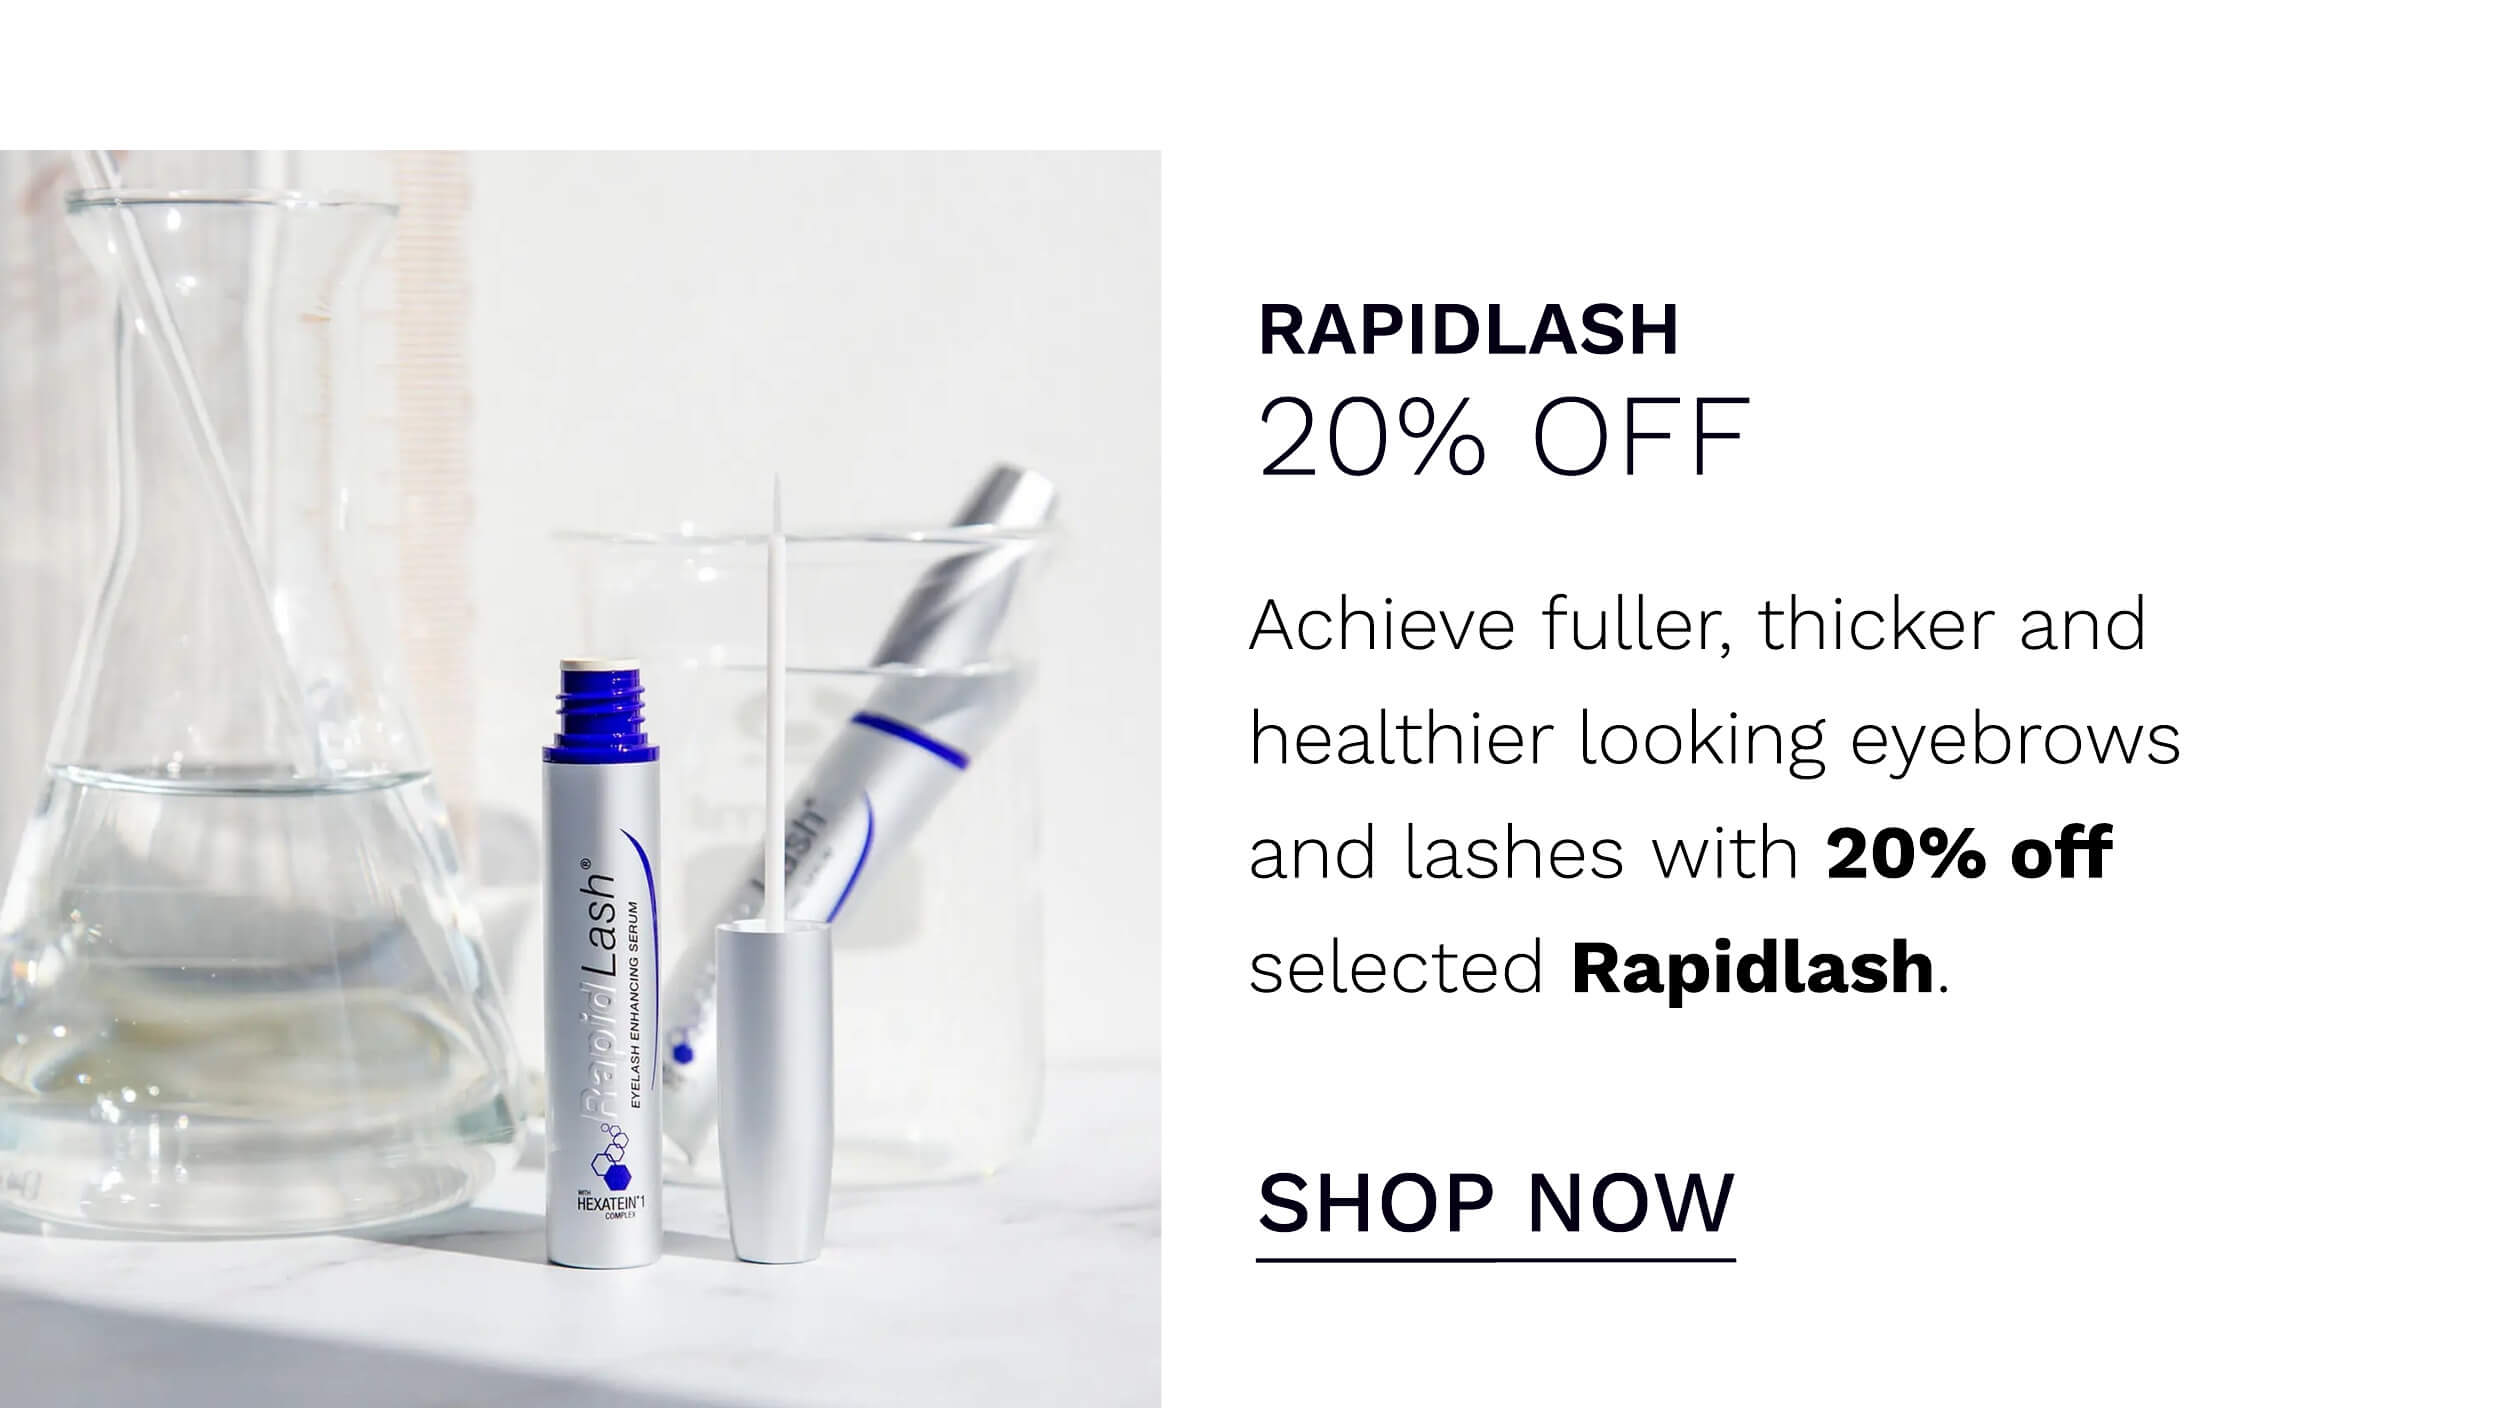  RAPIDLASH 20% OFF Achieve fuller, thicker and healthier looking eyebrows and lashes with 20% off selected Rapidlash. SHOP NOW 